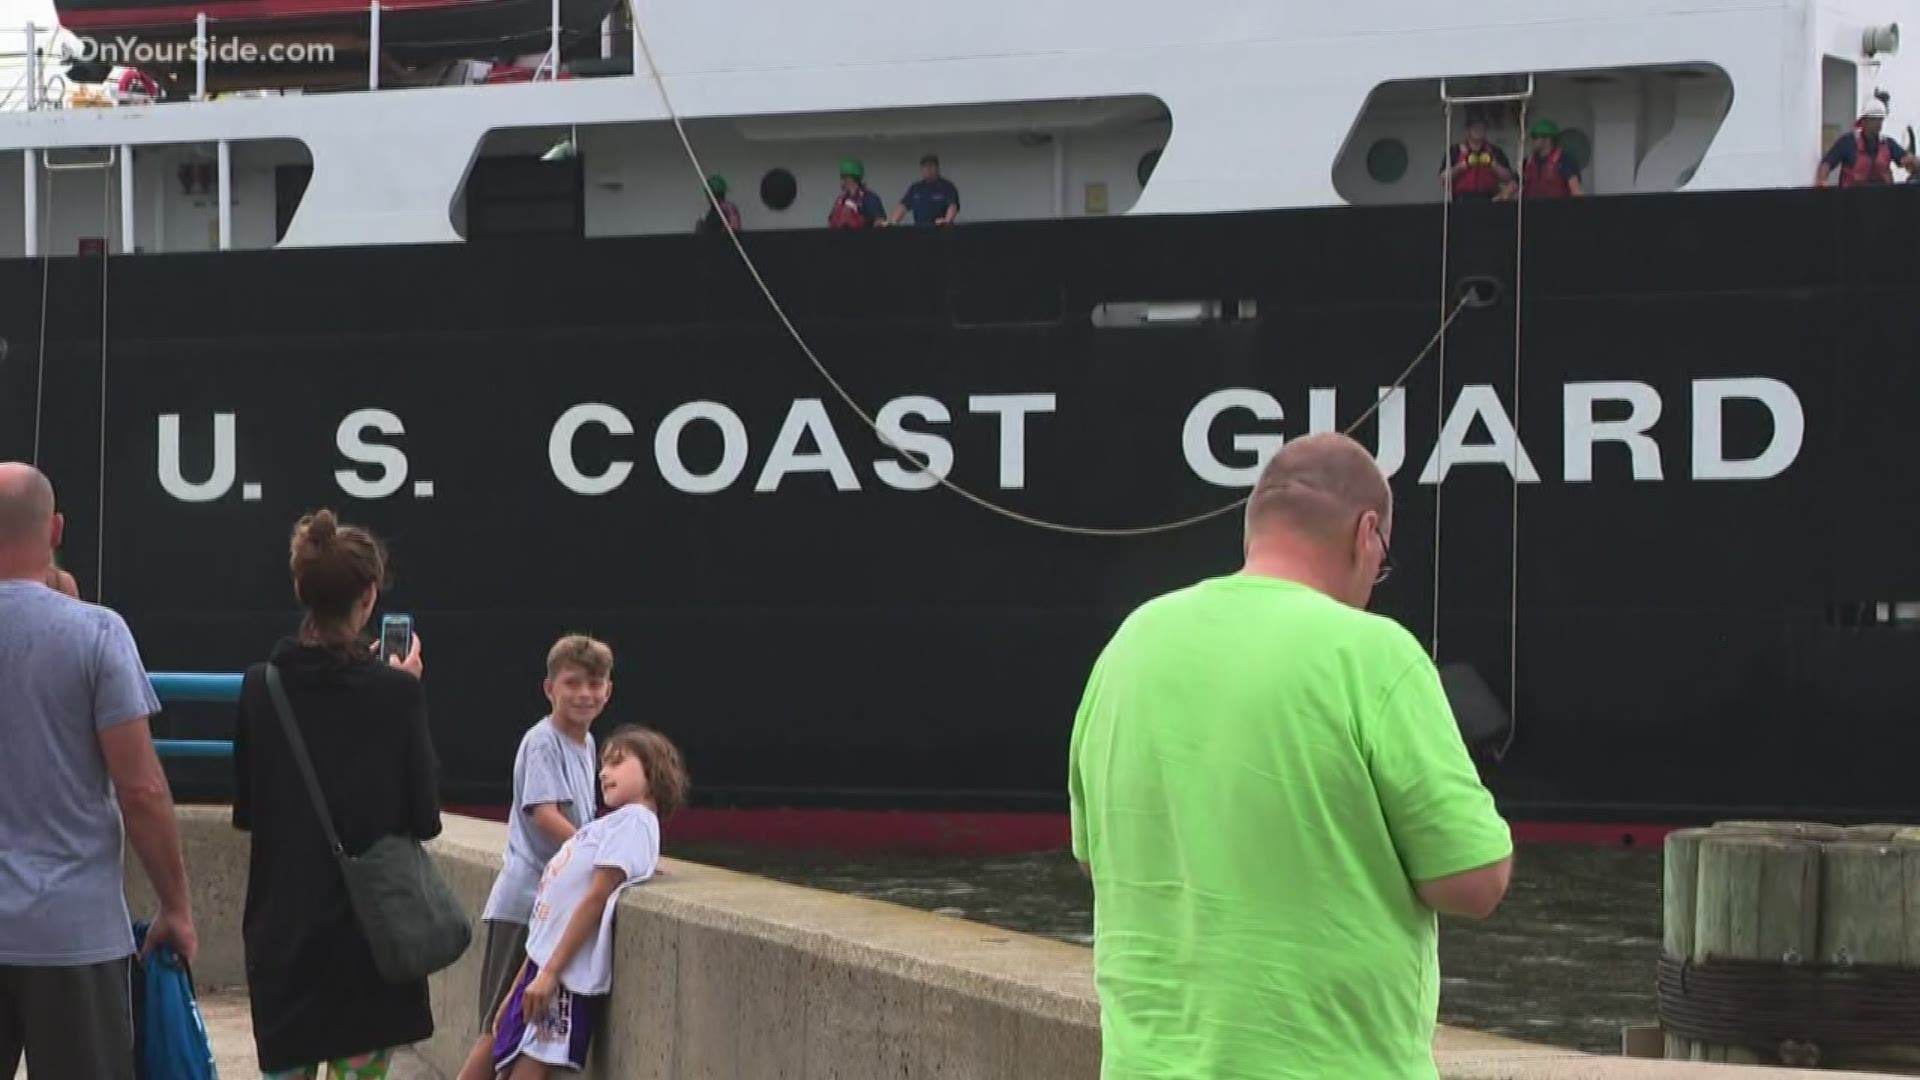 The Coast Guard is looking to recruit new service members, as they look to fill 4,000 positions this year.